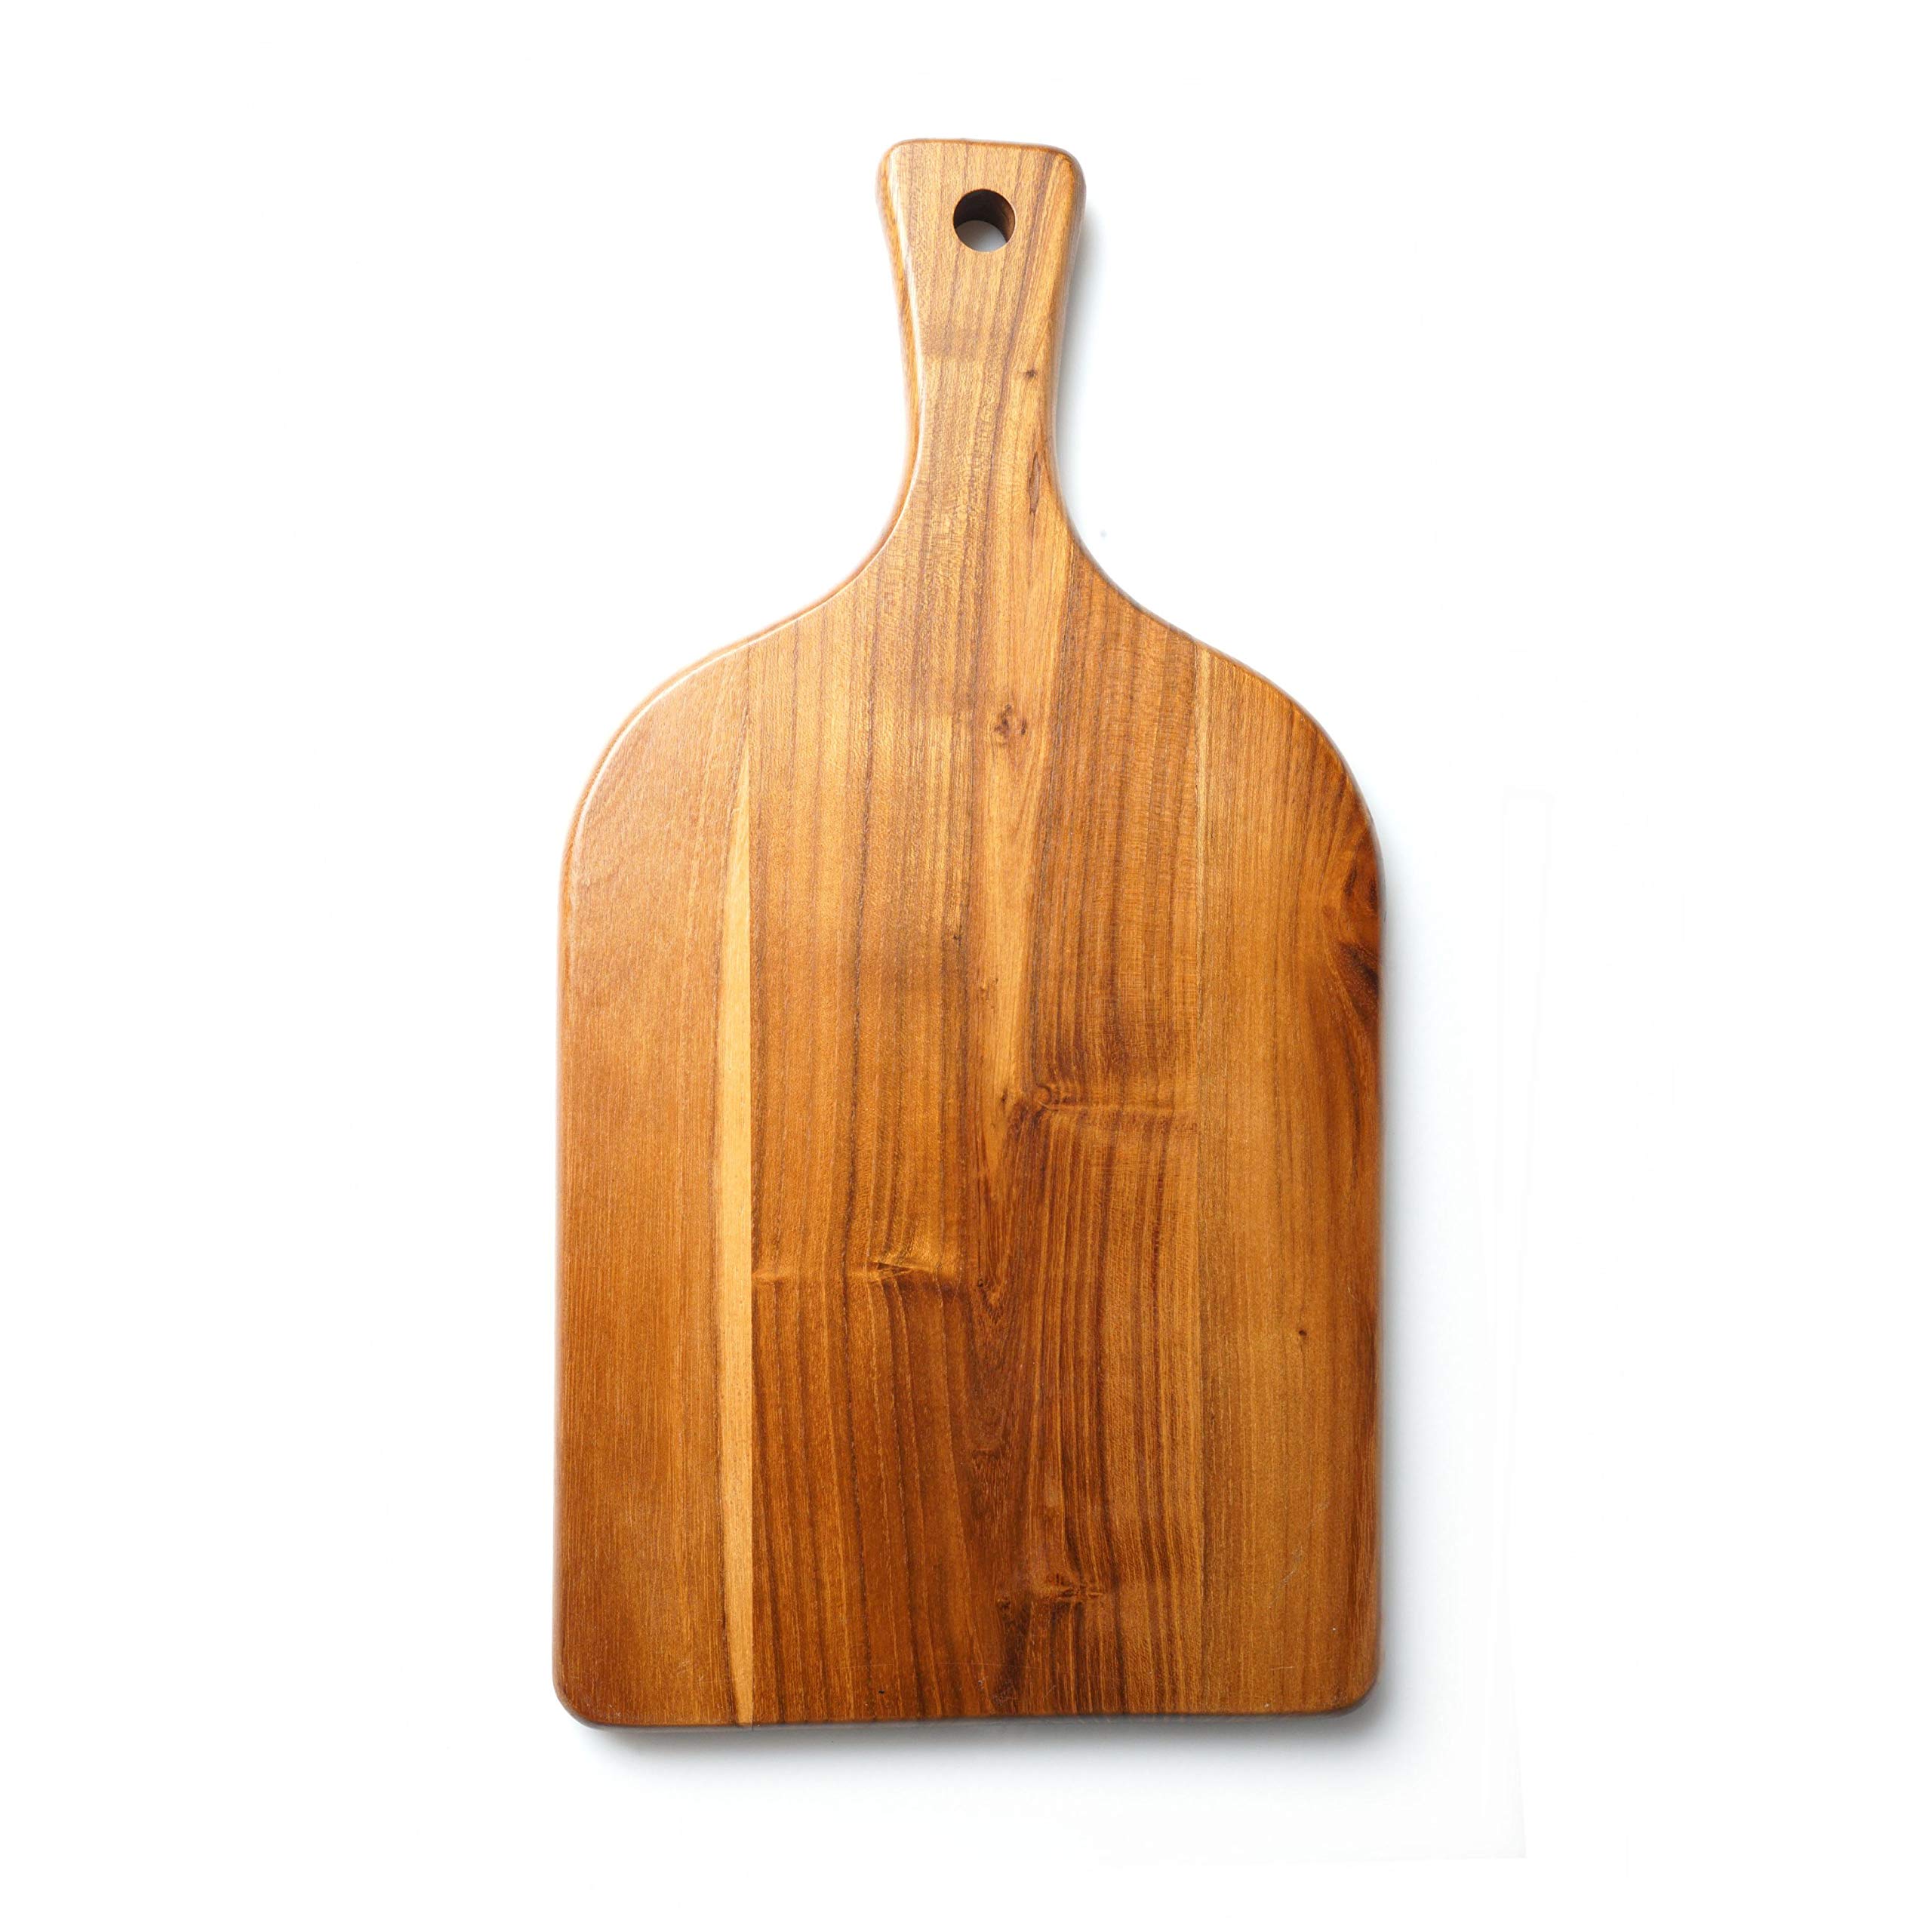 Best Bamboo Chopping Board Set for Effective Food Preparation